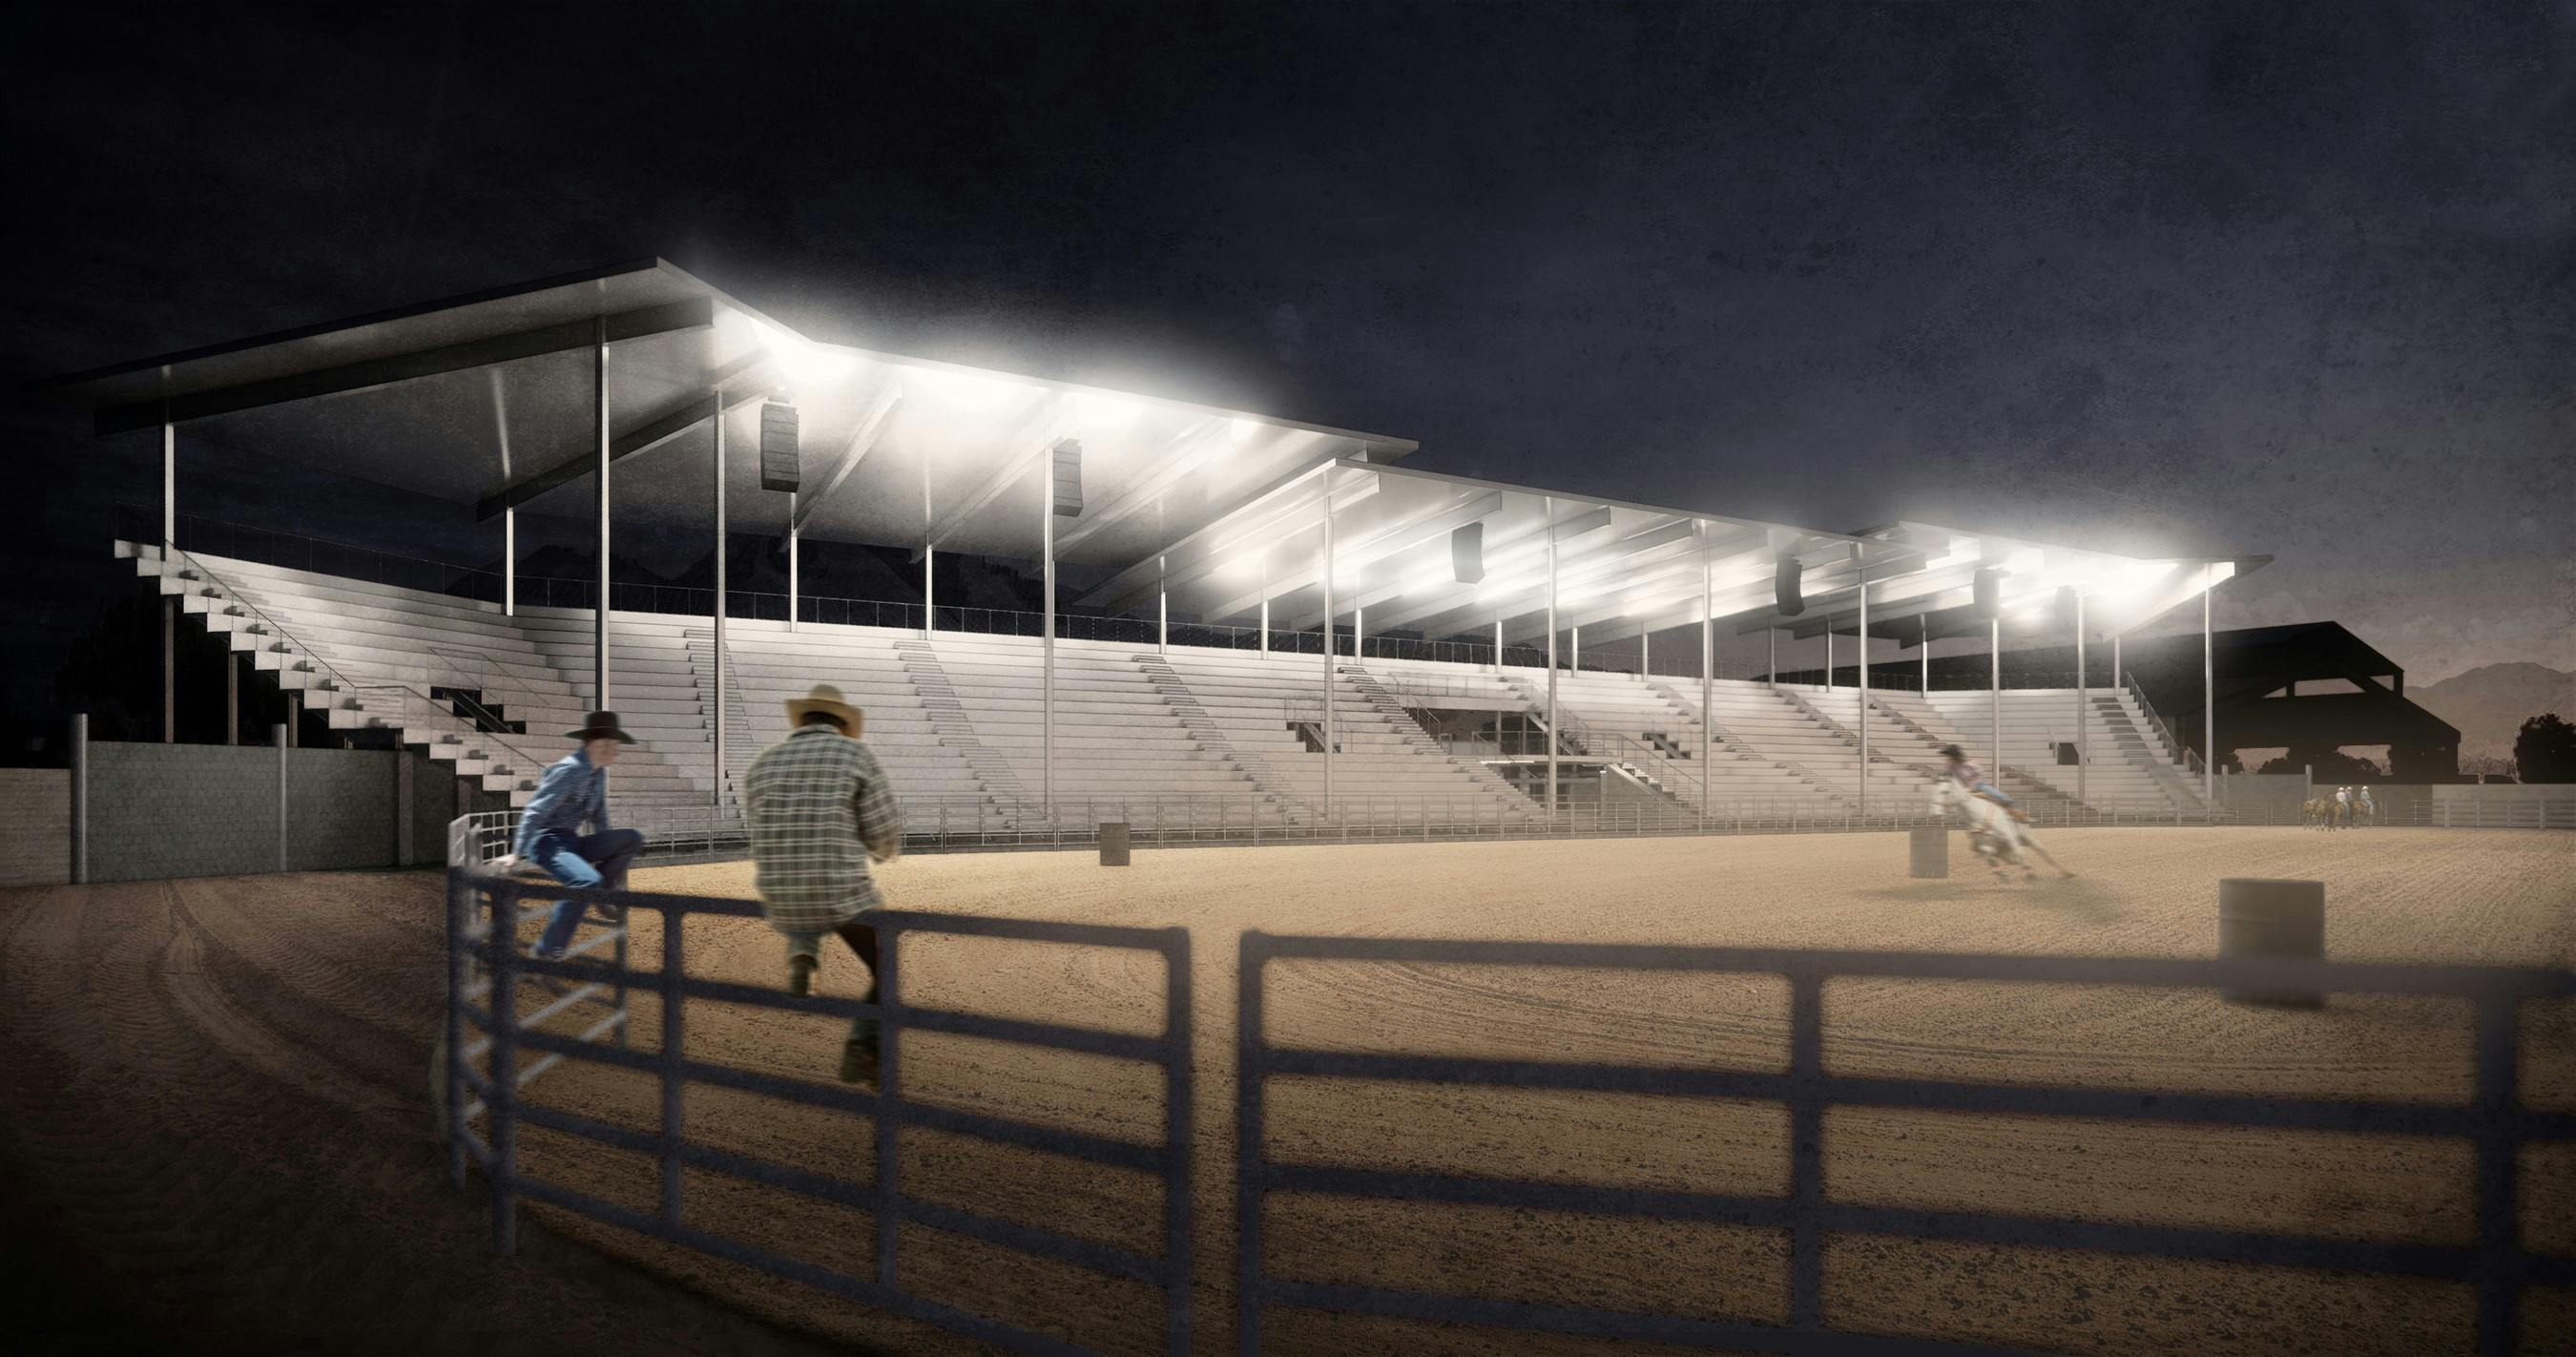 A rendering of the rodeo arena lit up at night with cowboys watching from the fence.